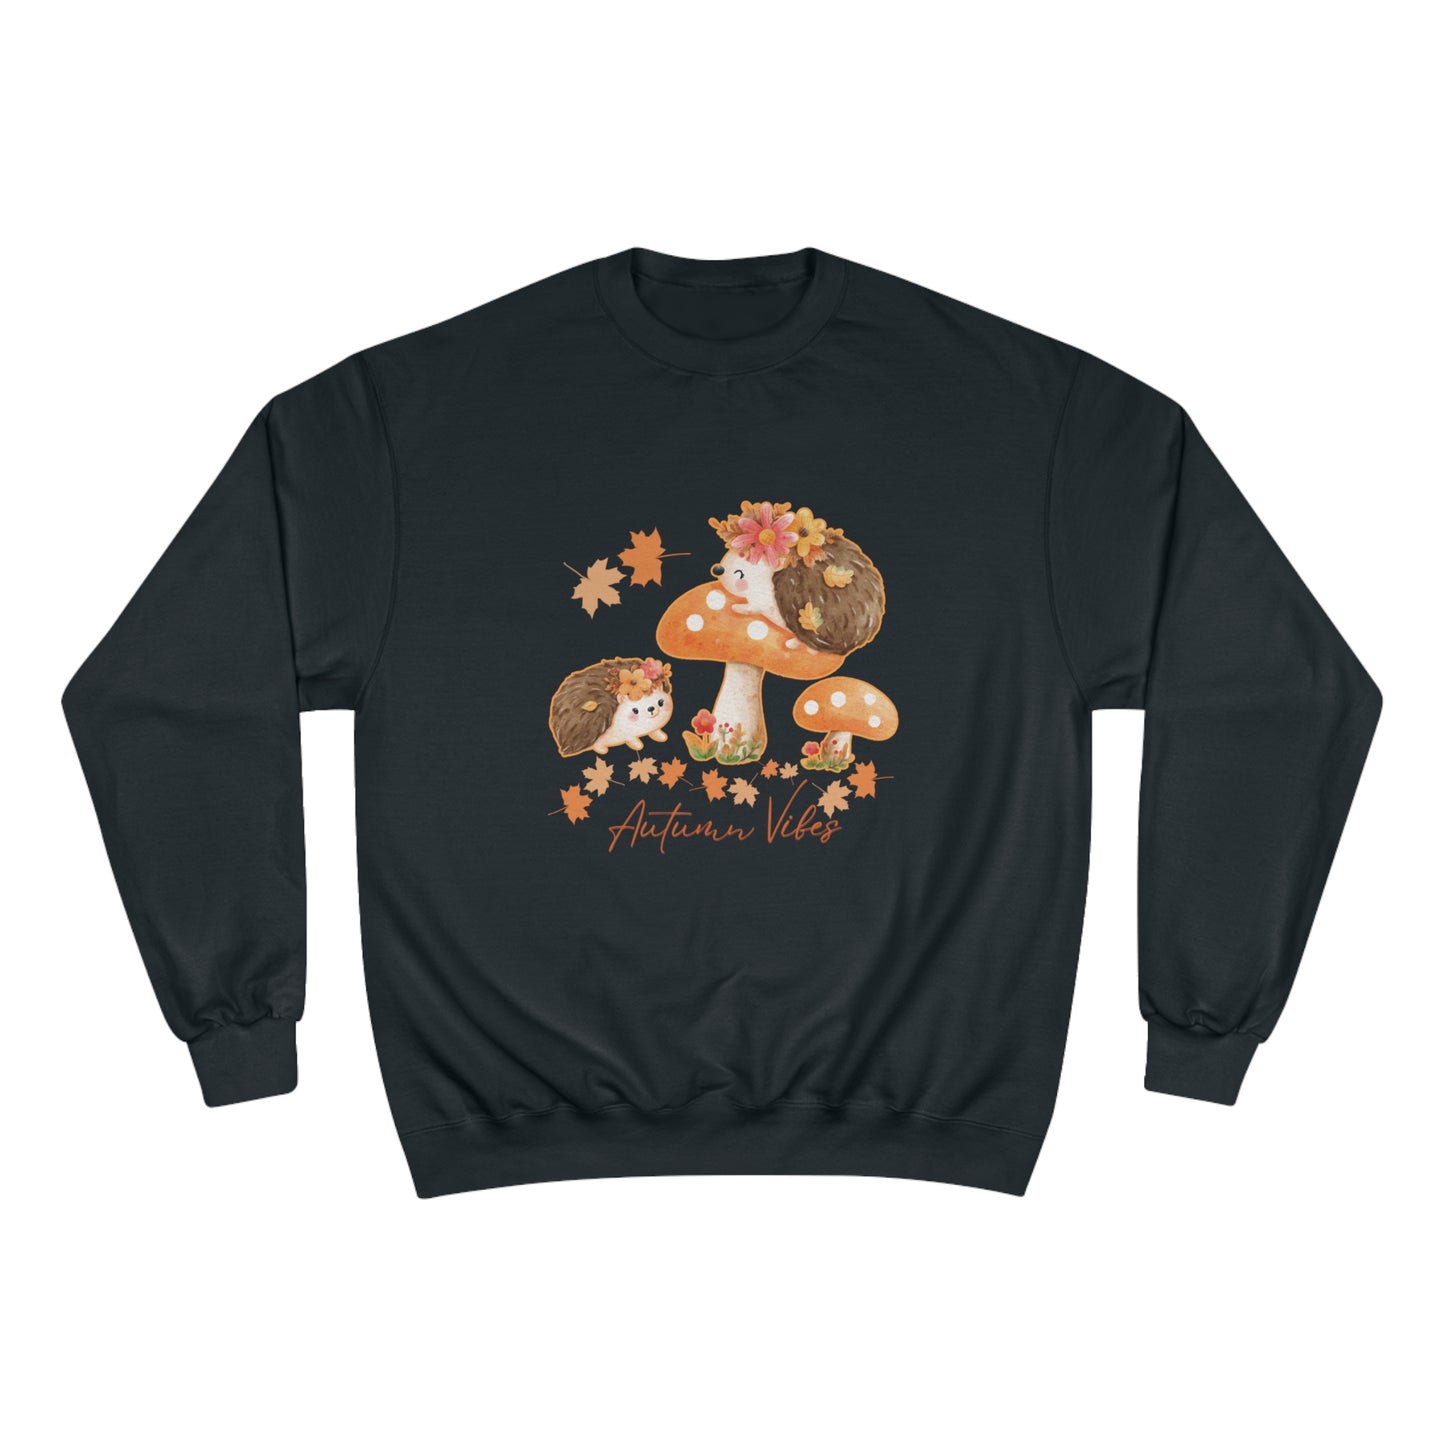 Autumn Vibes - Hedge hogs have all the fun in fall!  Champion Sweatshirt